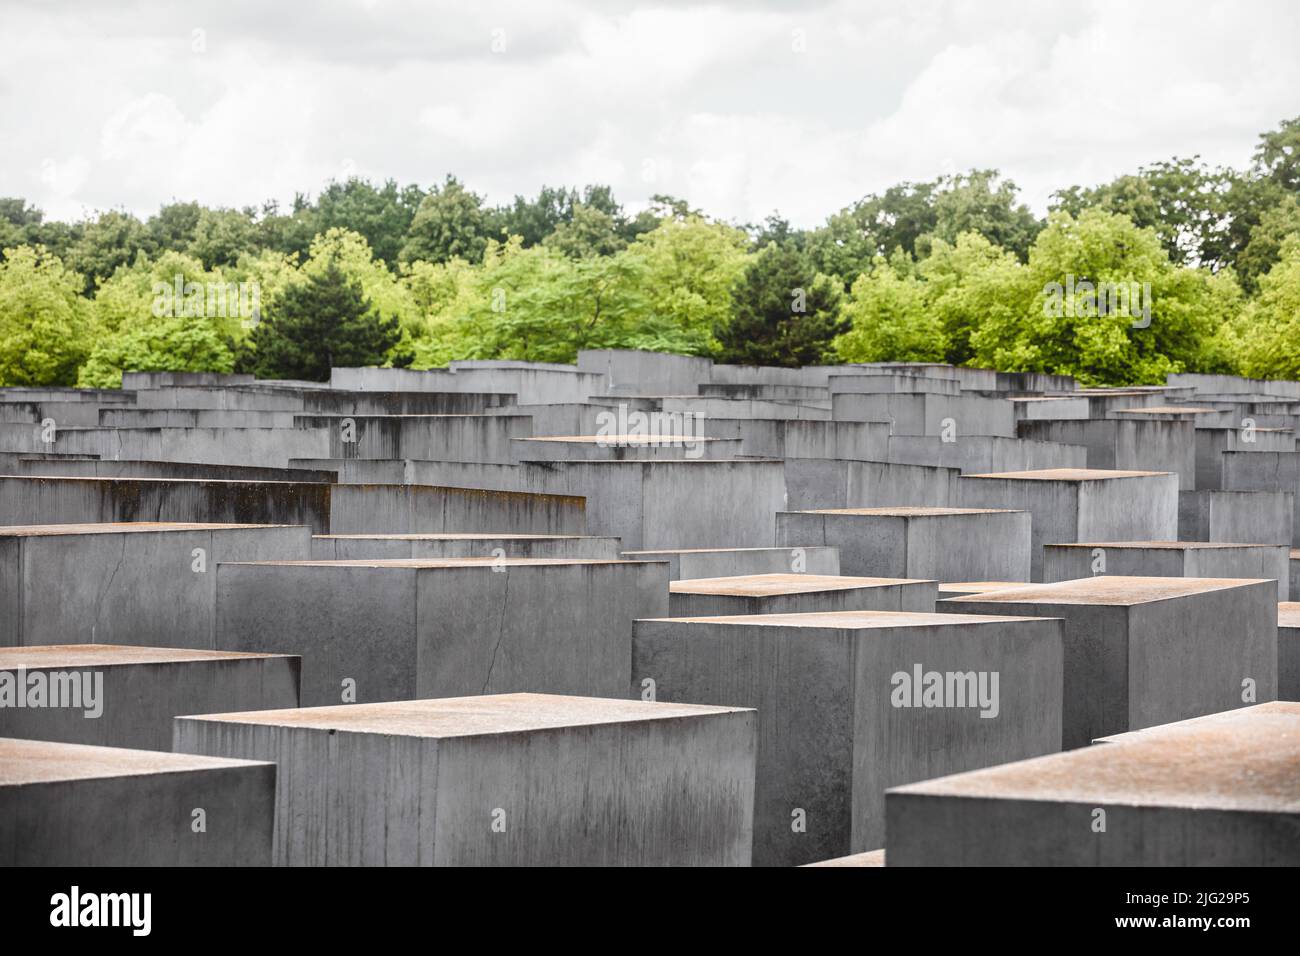 June 28, 2022, Berlin, Germany: General view of concrete slabs or ''stelae'' part of the Memorial to the Murdered Jews of Europe or ''Holocaust Memorial'' located south of the Brandenburg Gate. The Memorial to the Murdered Jews of Europe also known as the Holocaust Memorial is a memorial in Berlin to the Jewish victims of the Holocaust, designed by architect Peter Eisenman and Buro Happold. It consists of a 19,000-square-metre site covered with 2,711 concrete slabs or ''stelae'', arranged in a grid pattern on a sloping field. They are organized in rows, 54 of them going northÃ±south, and 87 he Stock Photo